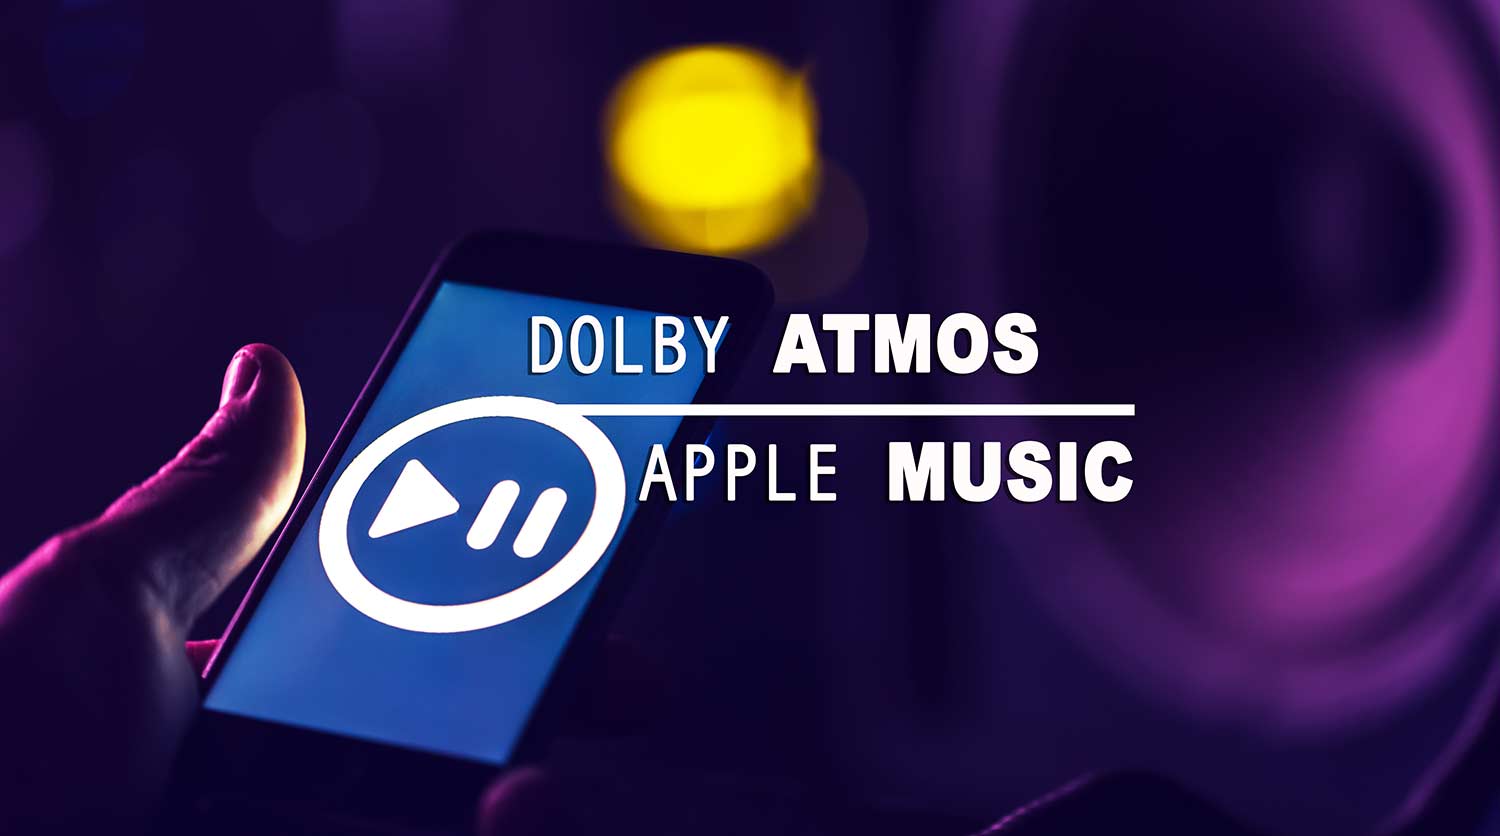 WHY IS DOLBY ATMOS THE FUTURE OF MUSIC?